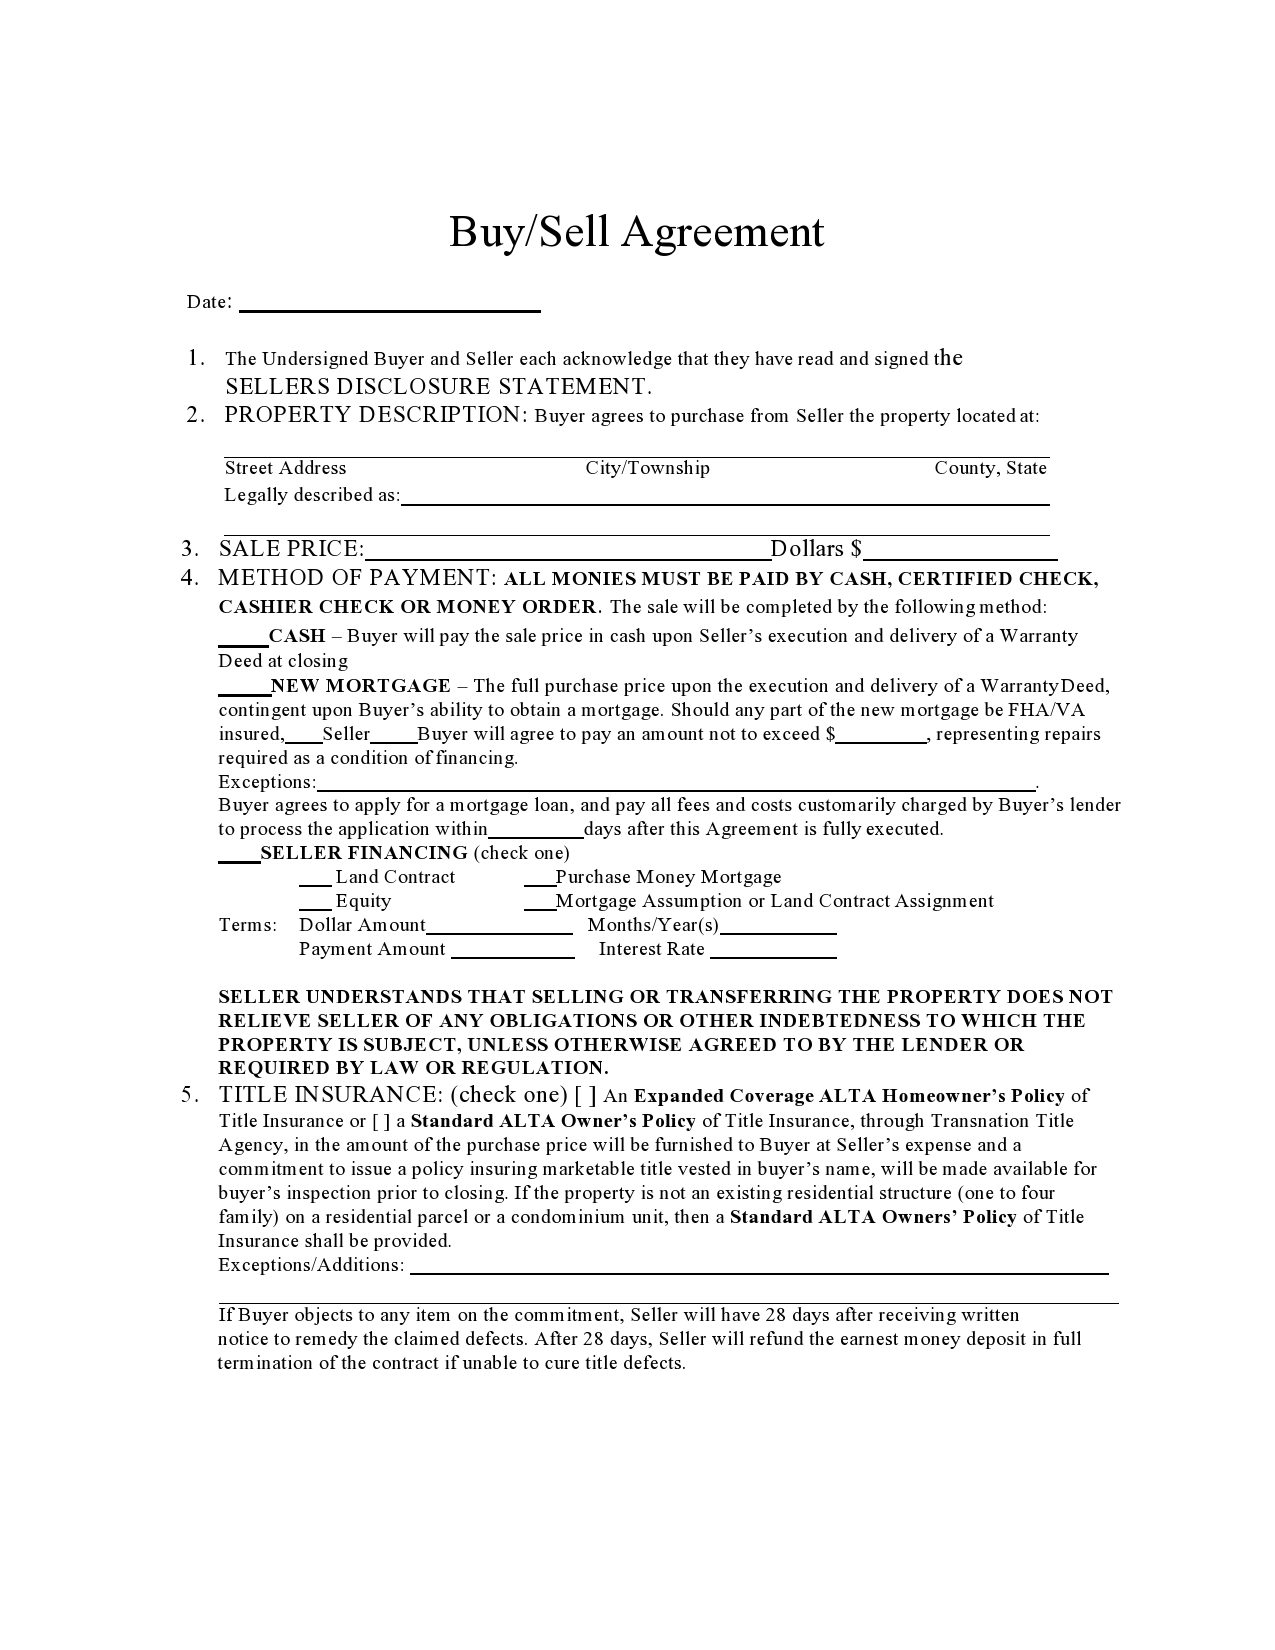 Free buy sell agreement 34